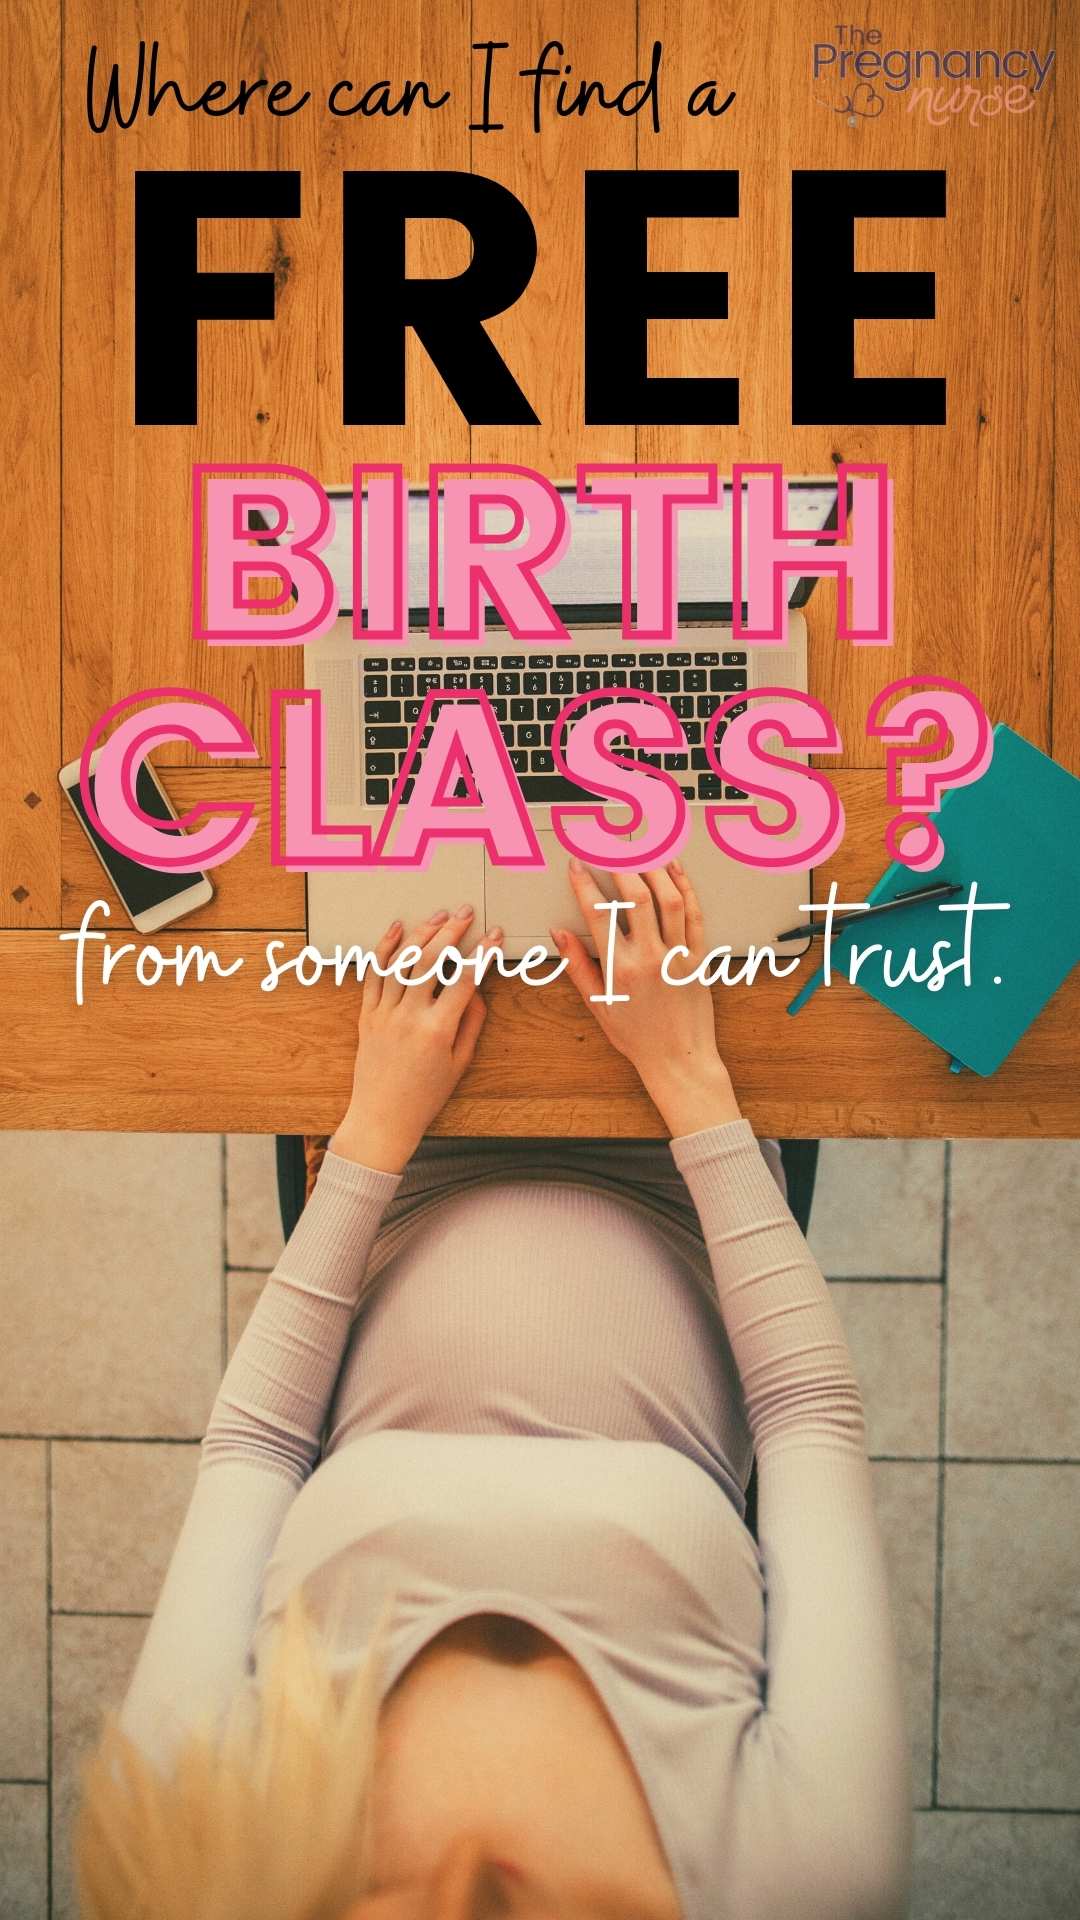 Are you looking for a great prenatal class but don't want to spend the money? Check out these free online classes that will help you have the birth experience you desire. Everything from creating your birth plan, to dealing with labor pain is covered in these courses. Don't miss out!